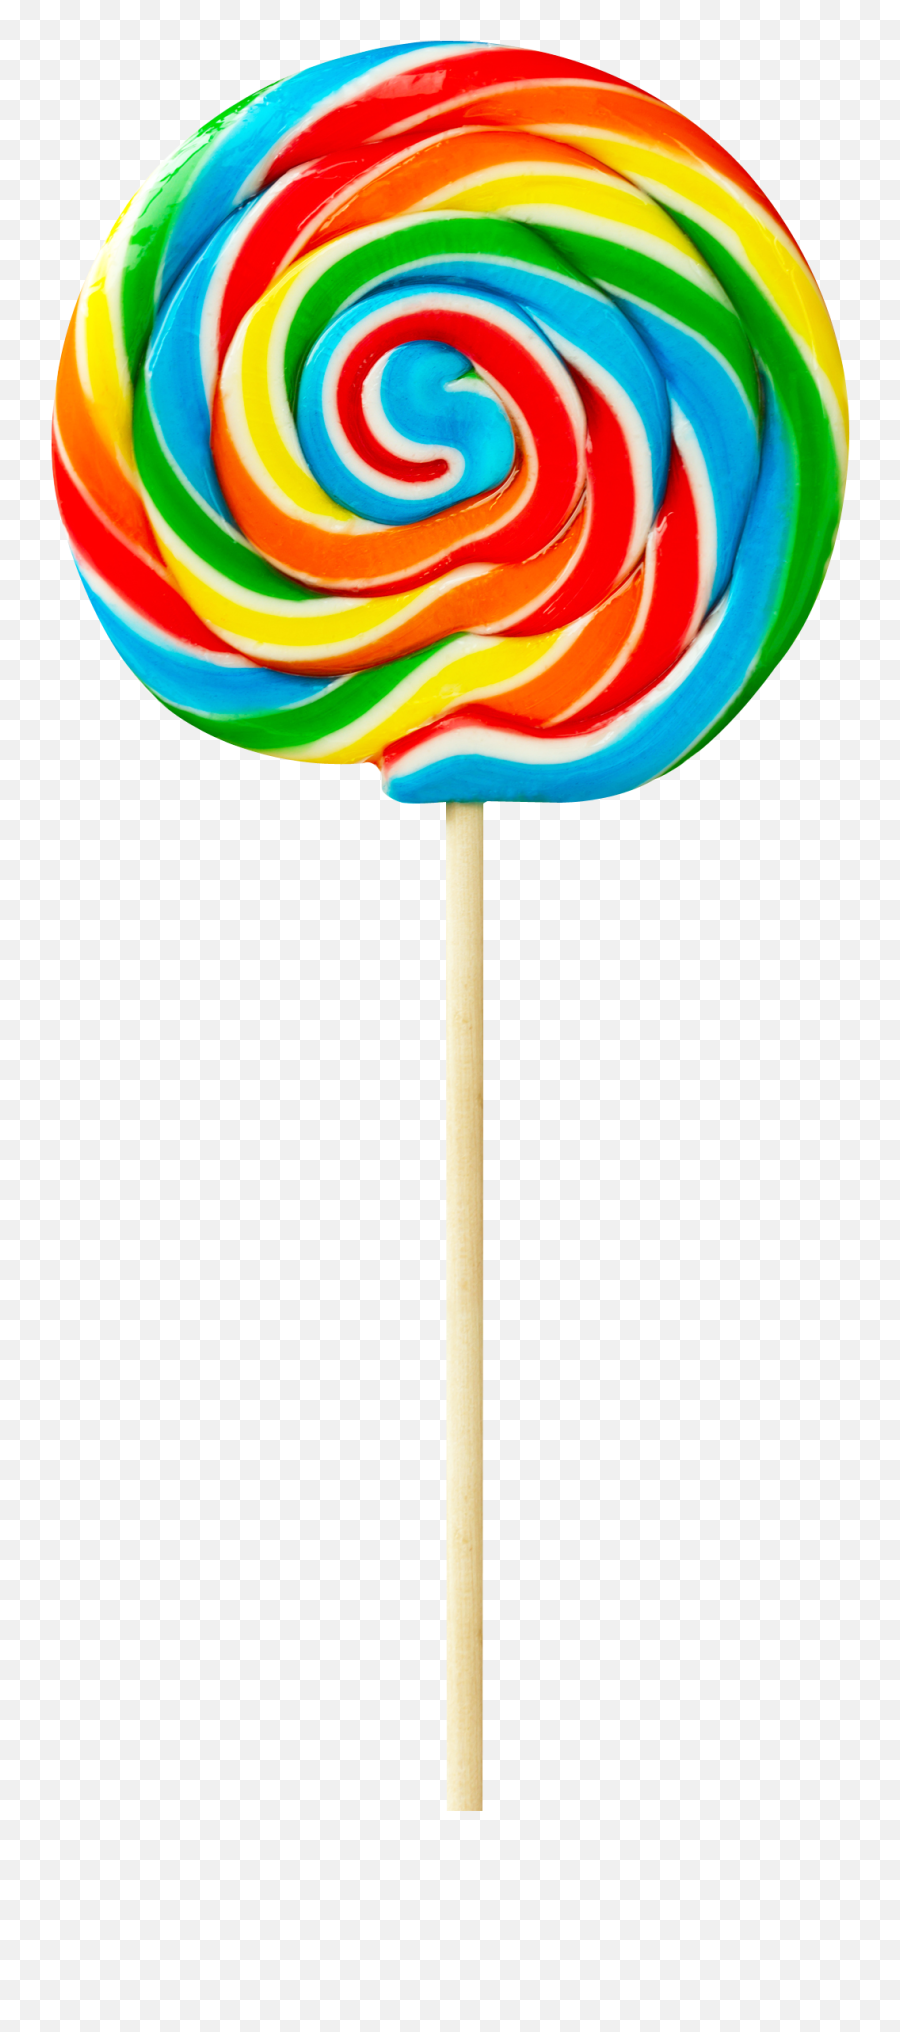 Download Lollipop Candy Png Image For Free - Transparent Lollipop Candy Png,Lollipop Transparent